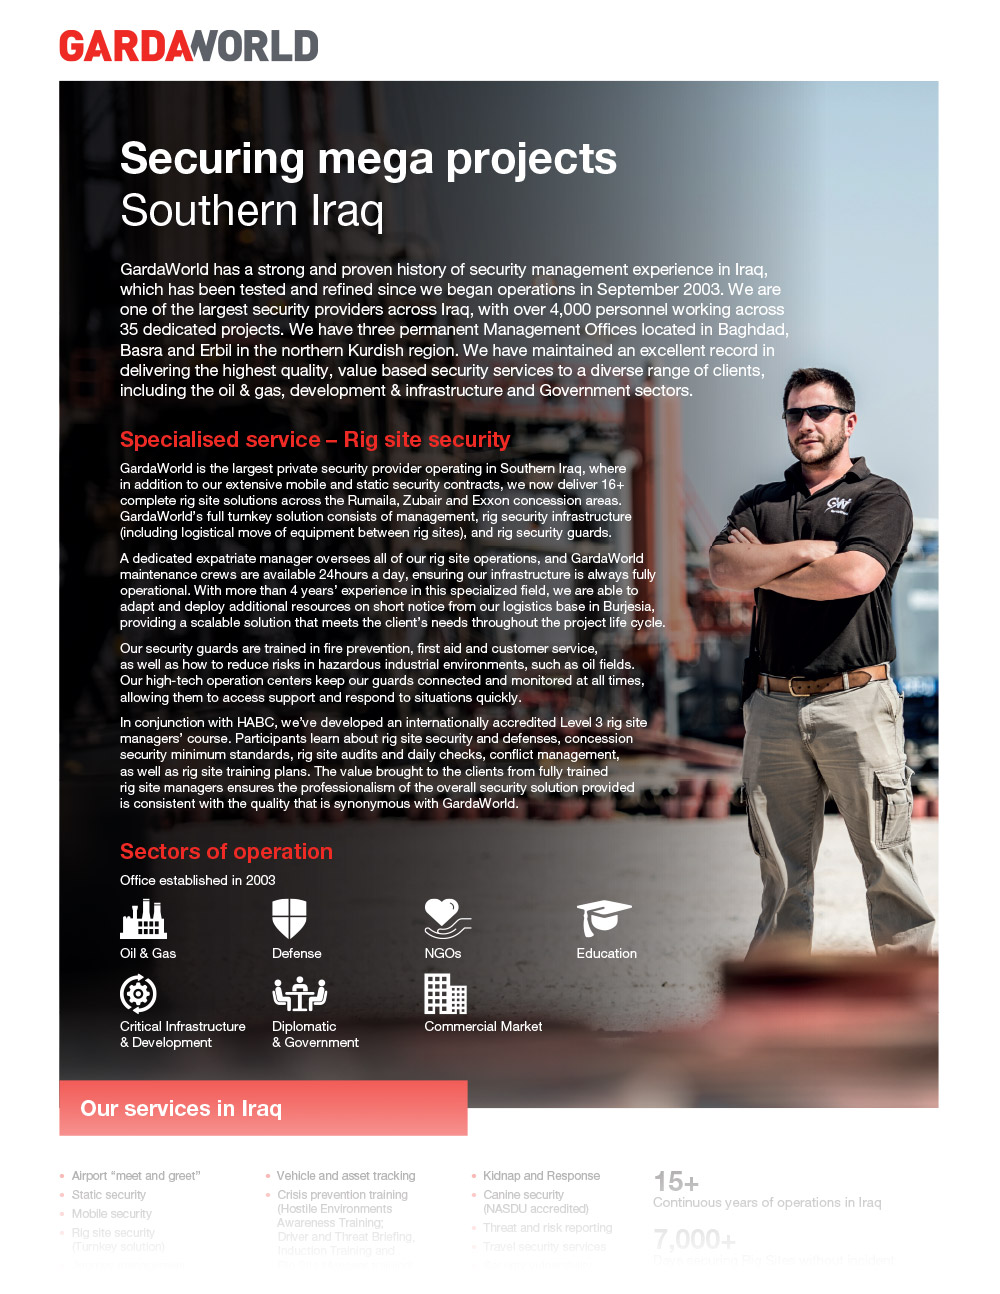 Securing mega projects in Southern Iraq